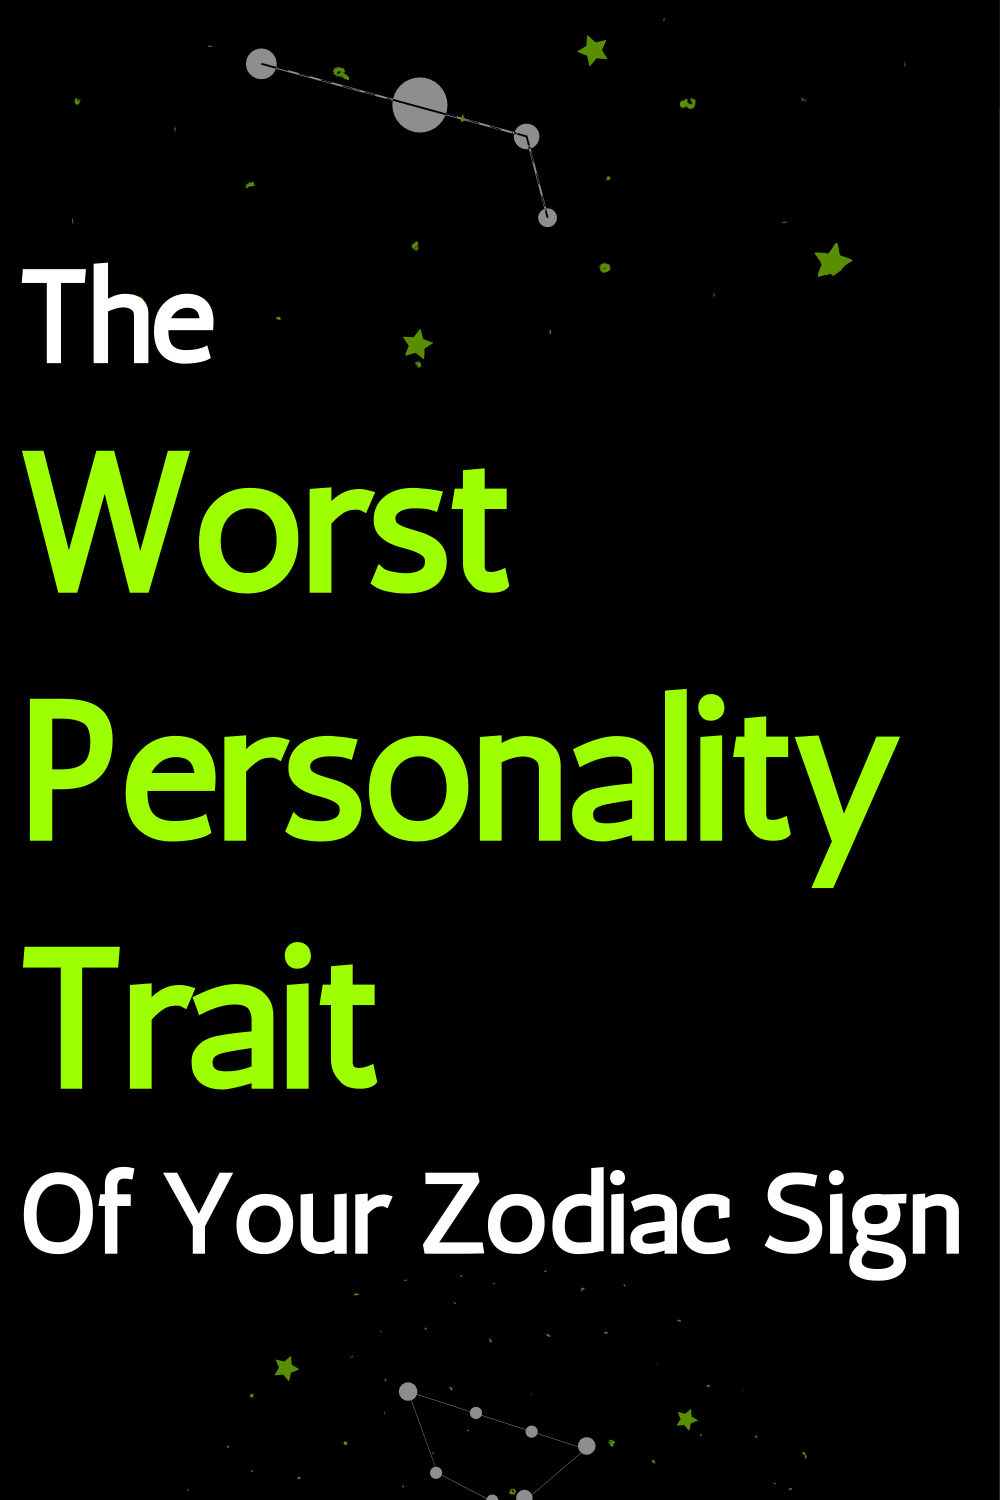 The Worst Personality Trait Of Your Zodiac Sign